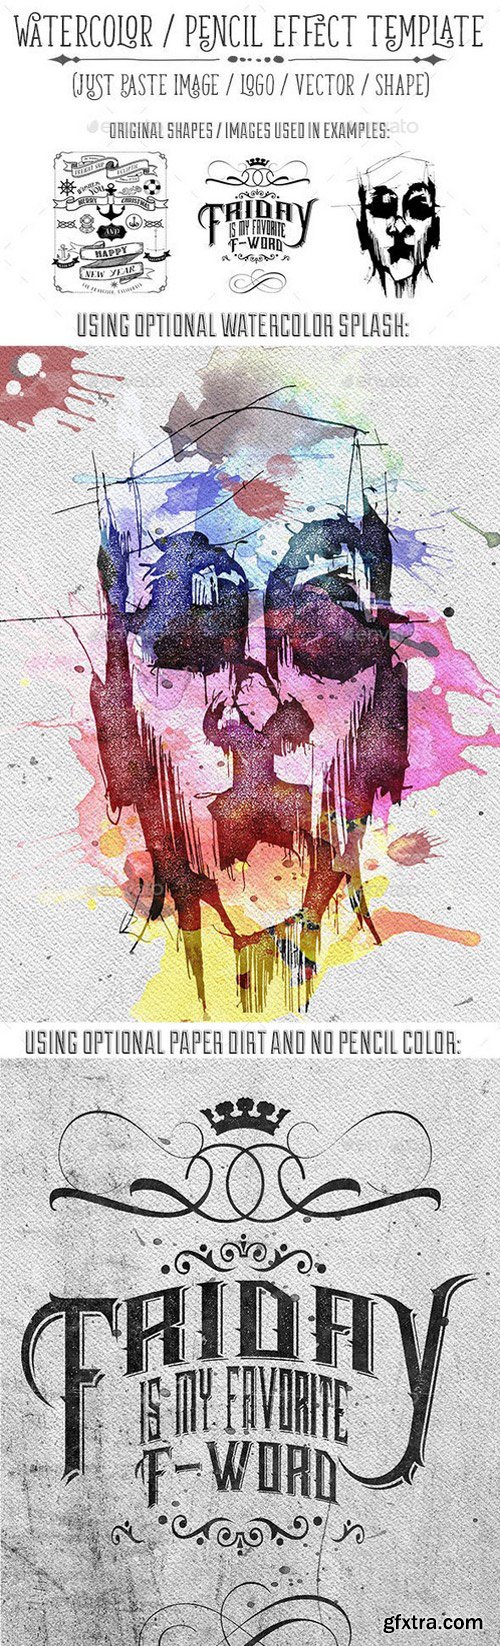 Graphicriver - Watercolor Or Pencil Press Style Text Logo Image Treatment 14484286